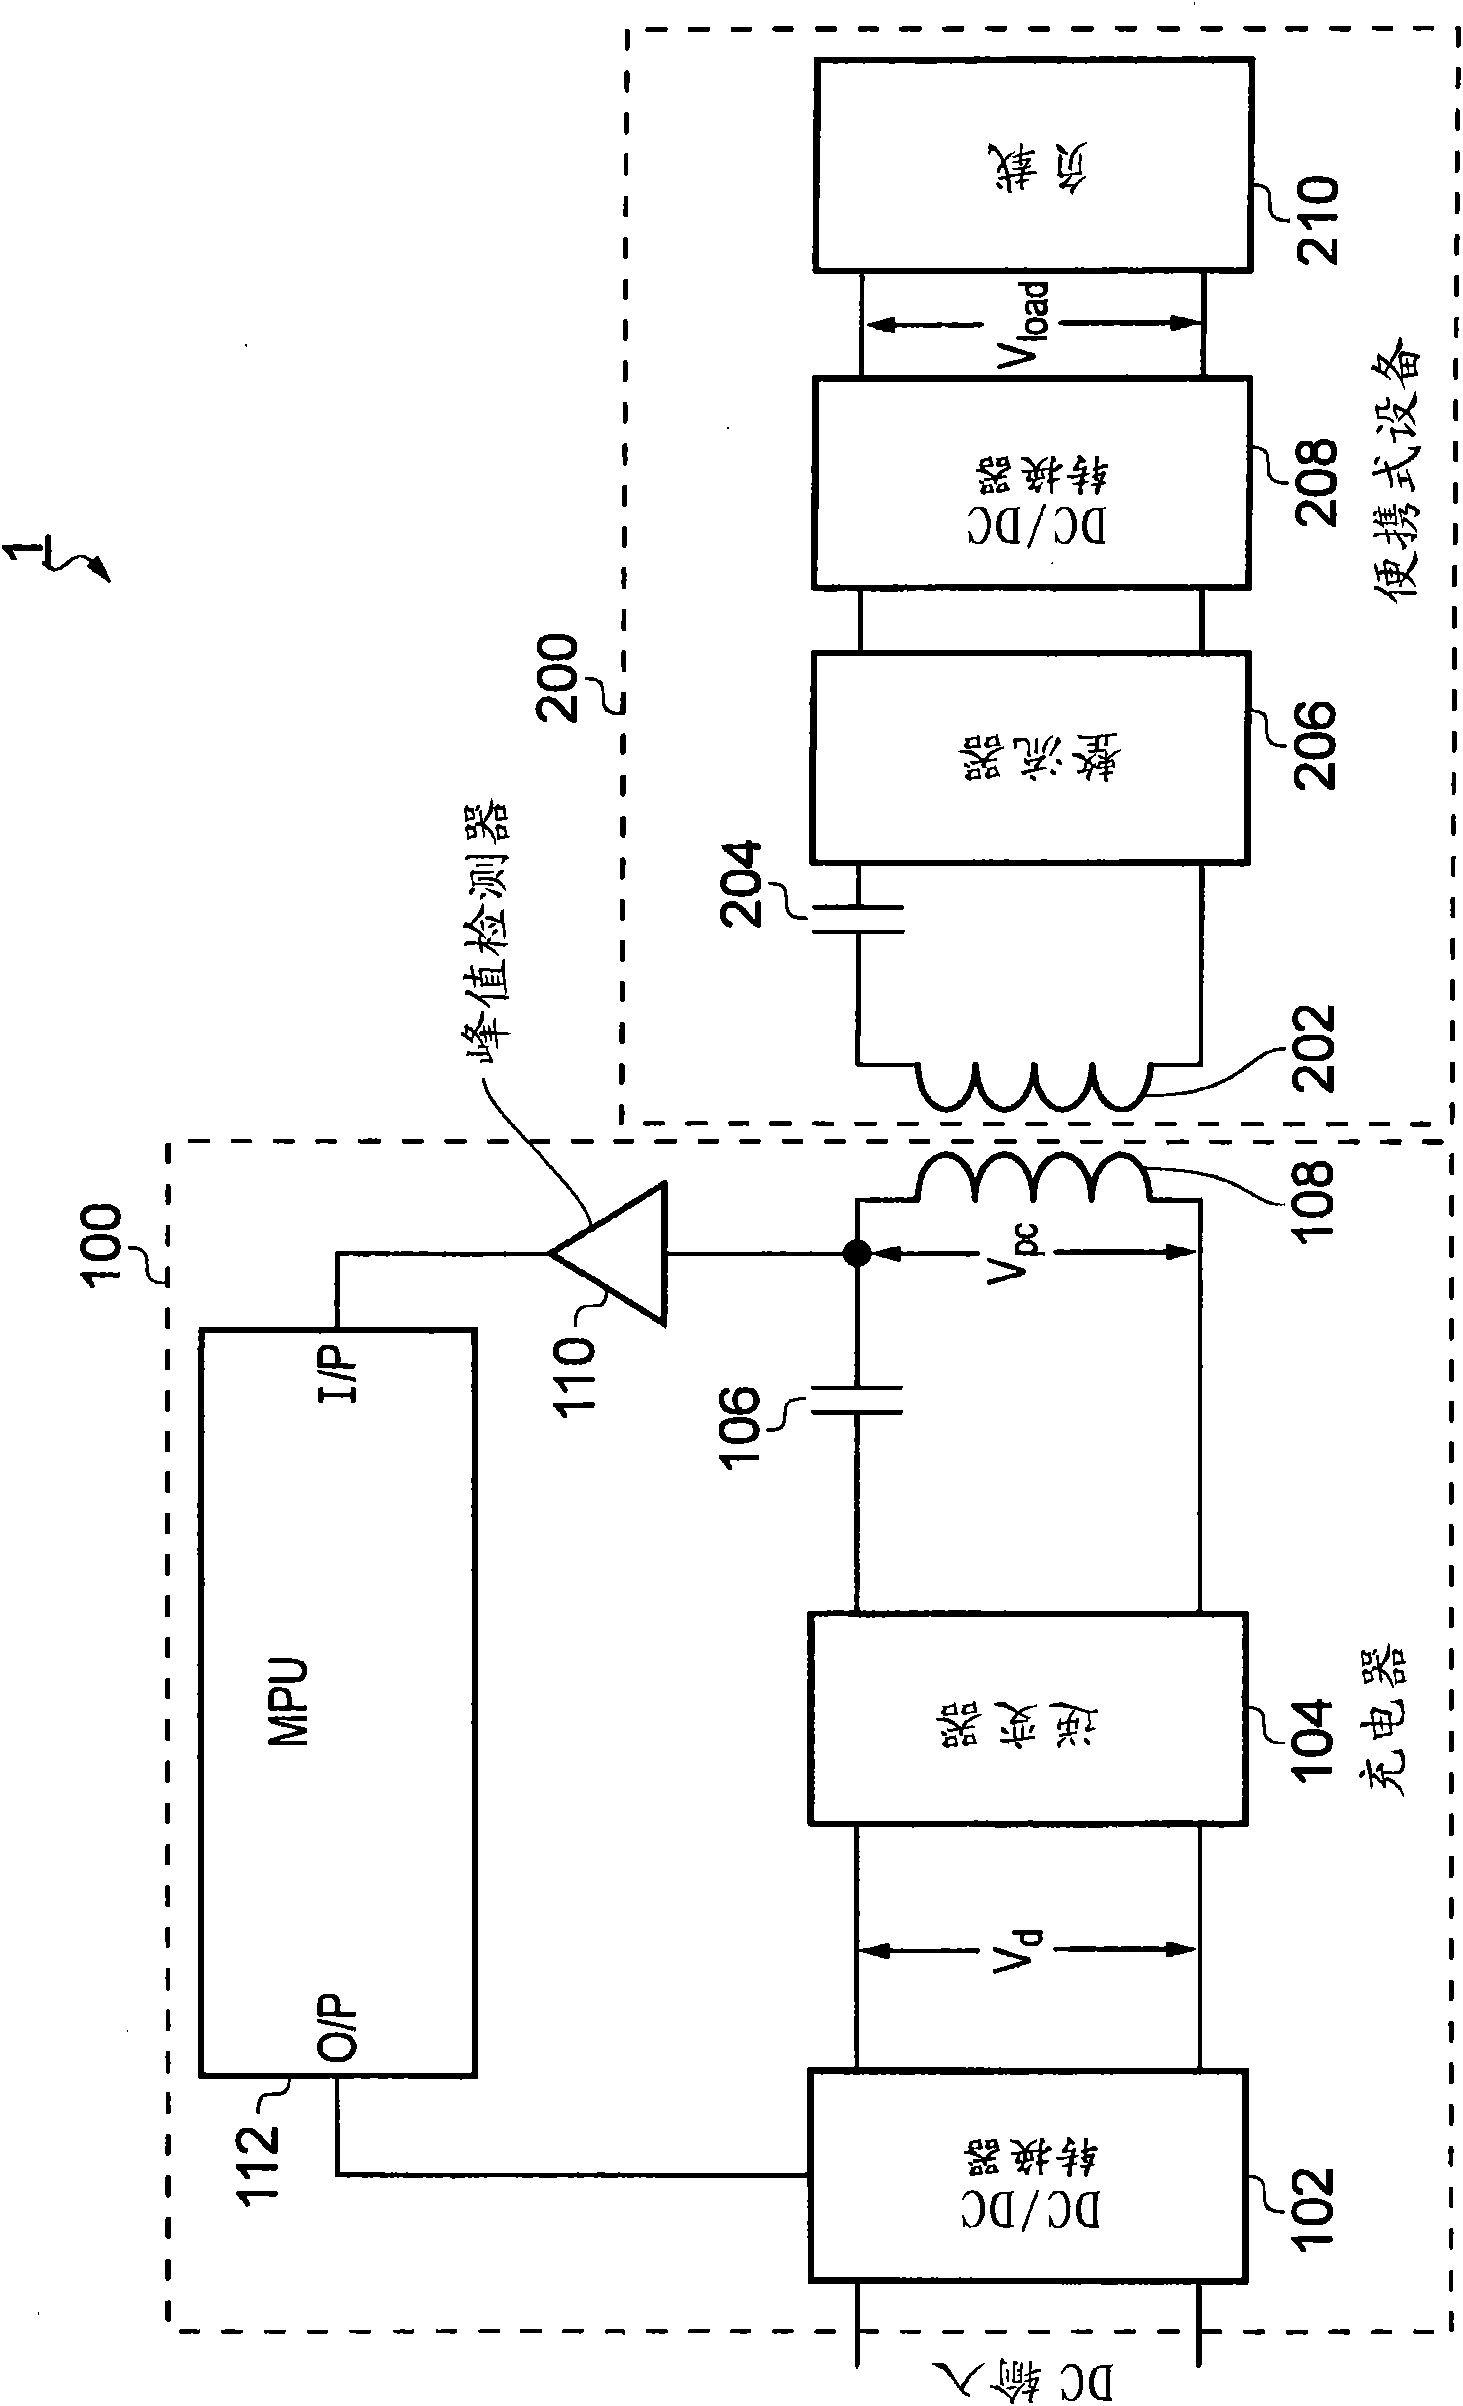 Circuitry for inductive power transfer